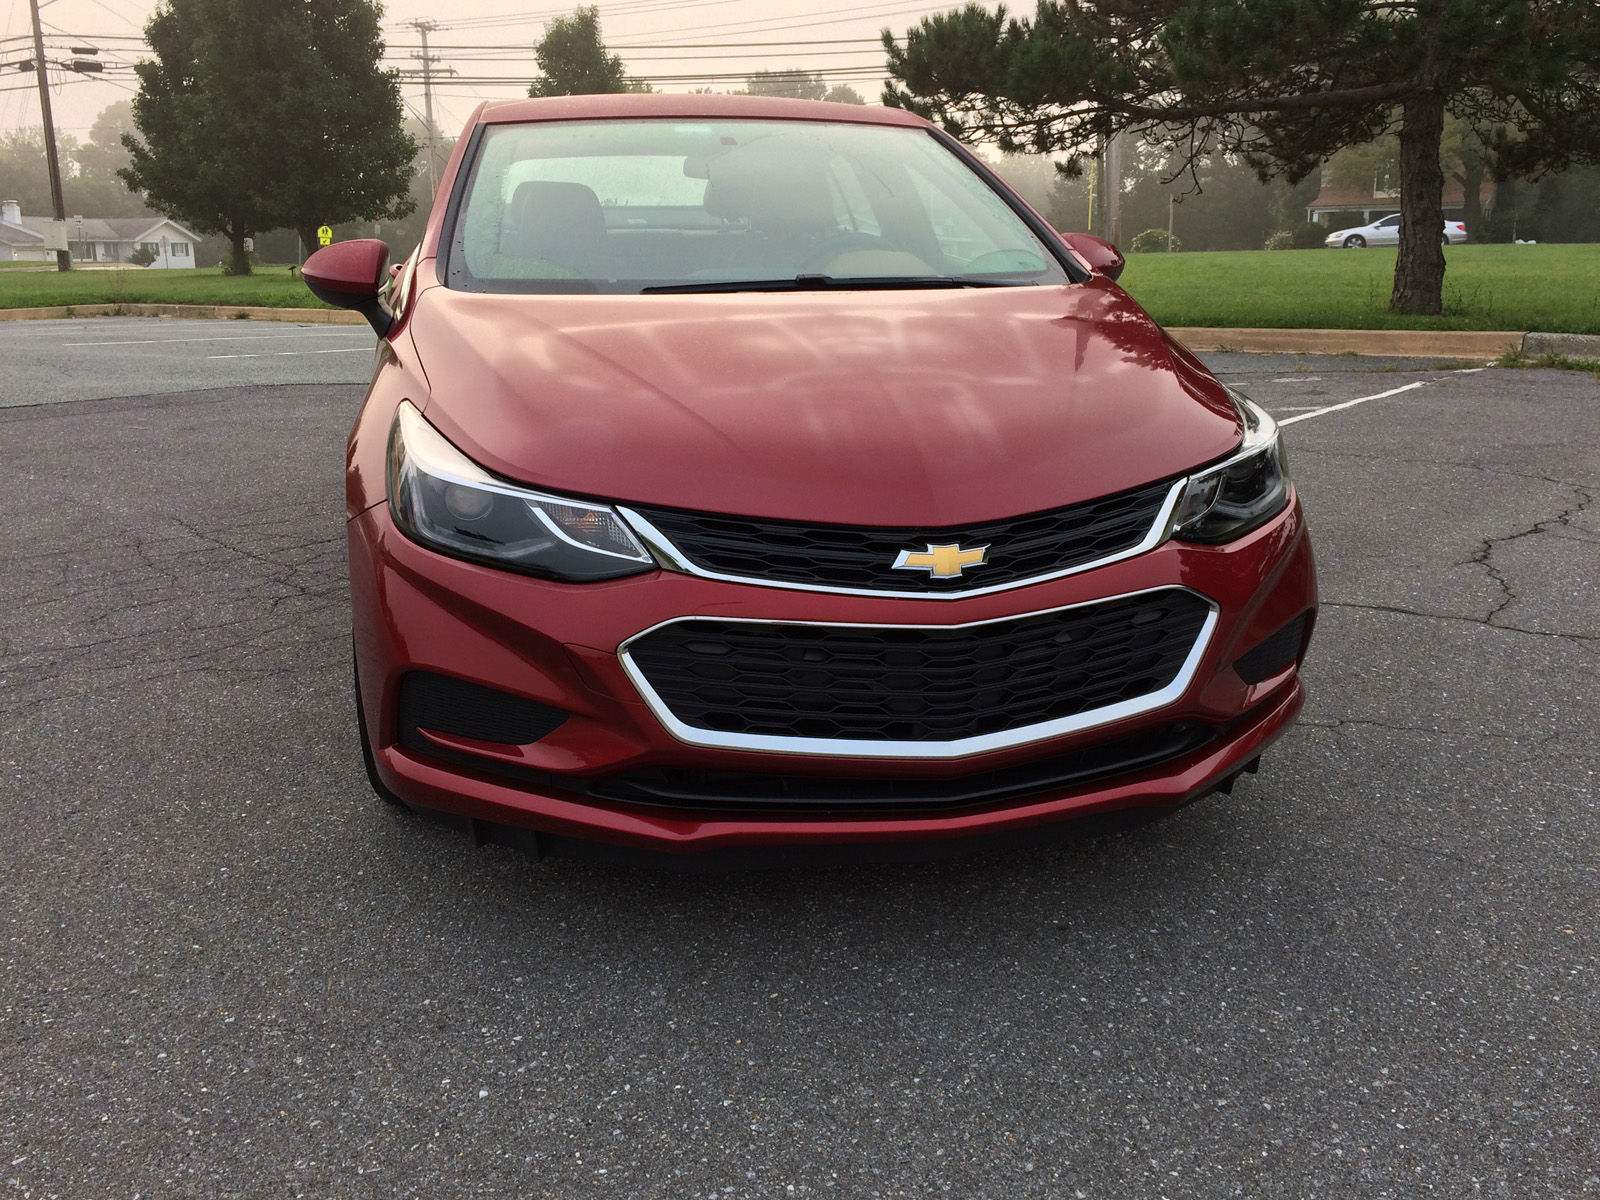 The Cruze isn’t the sportiest compact on the market but it does surprise you on back roads and soaks most bumps very well. The noise is kept in check on the highway making it one of the more hushed compacts. (WTOP/Mike Parris)